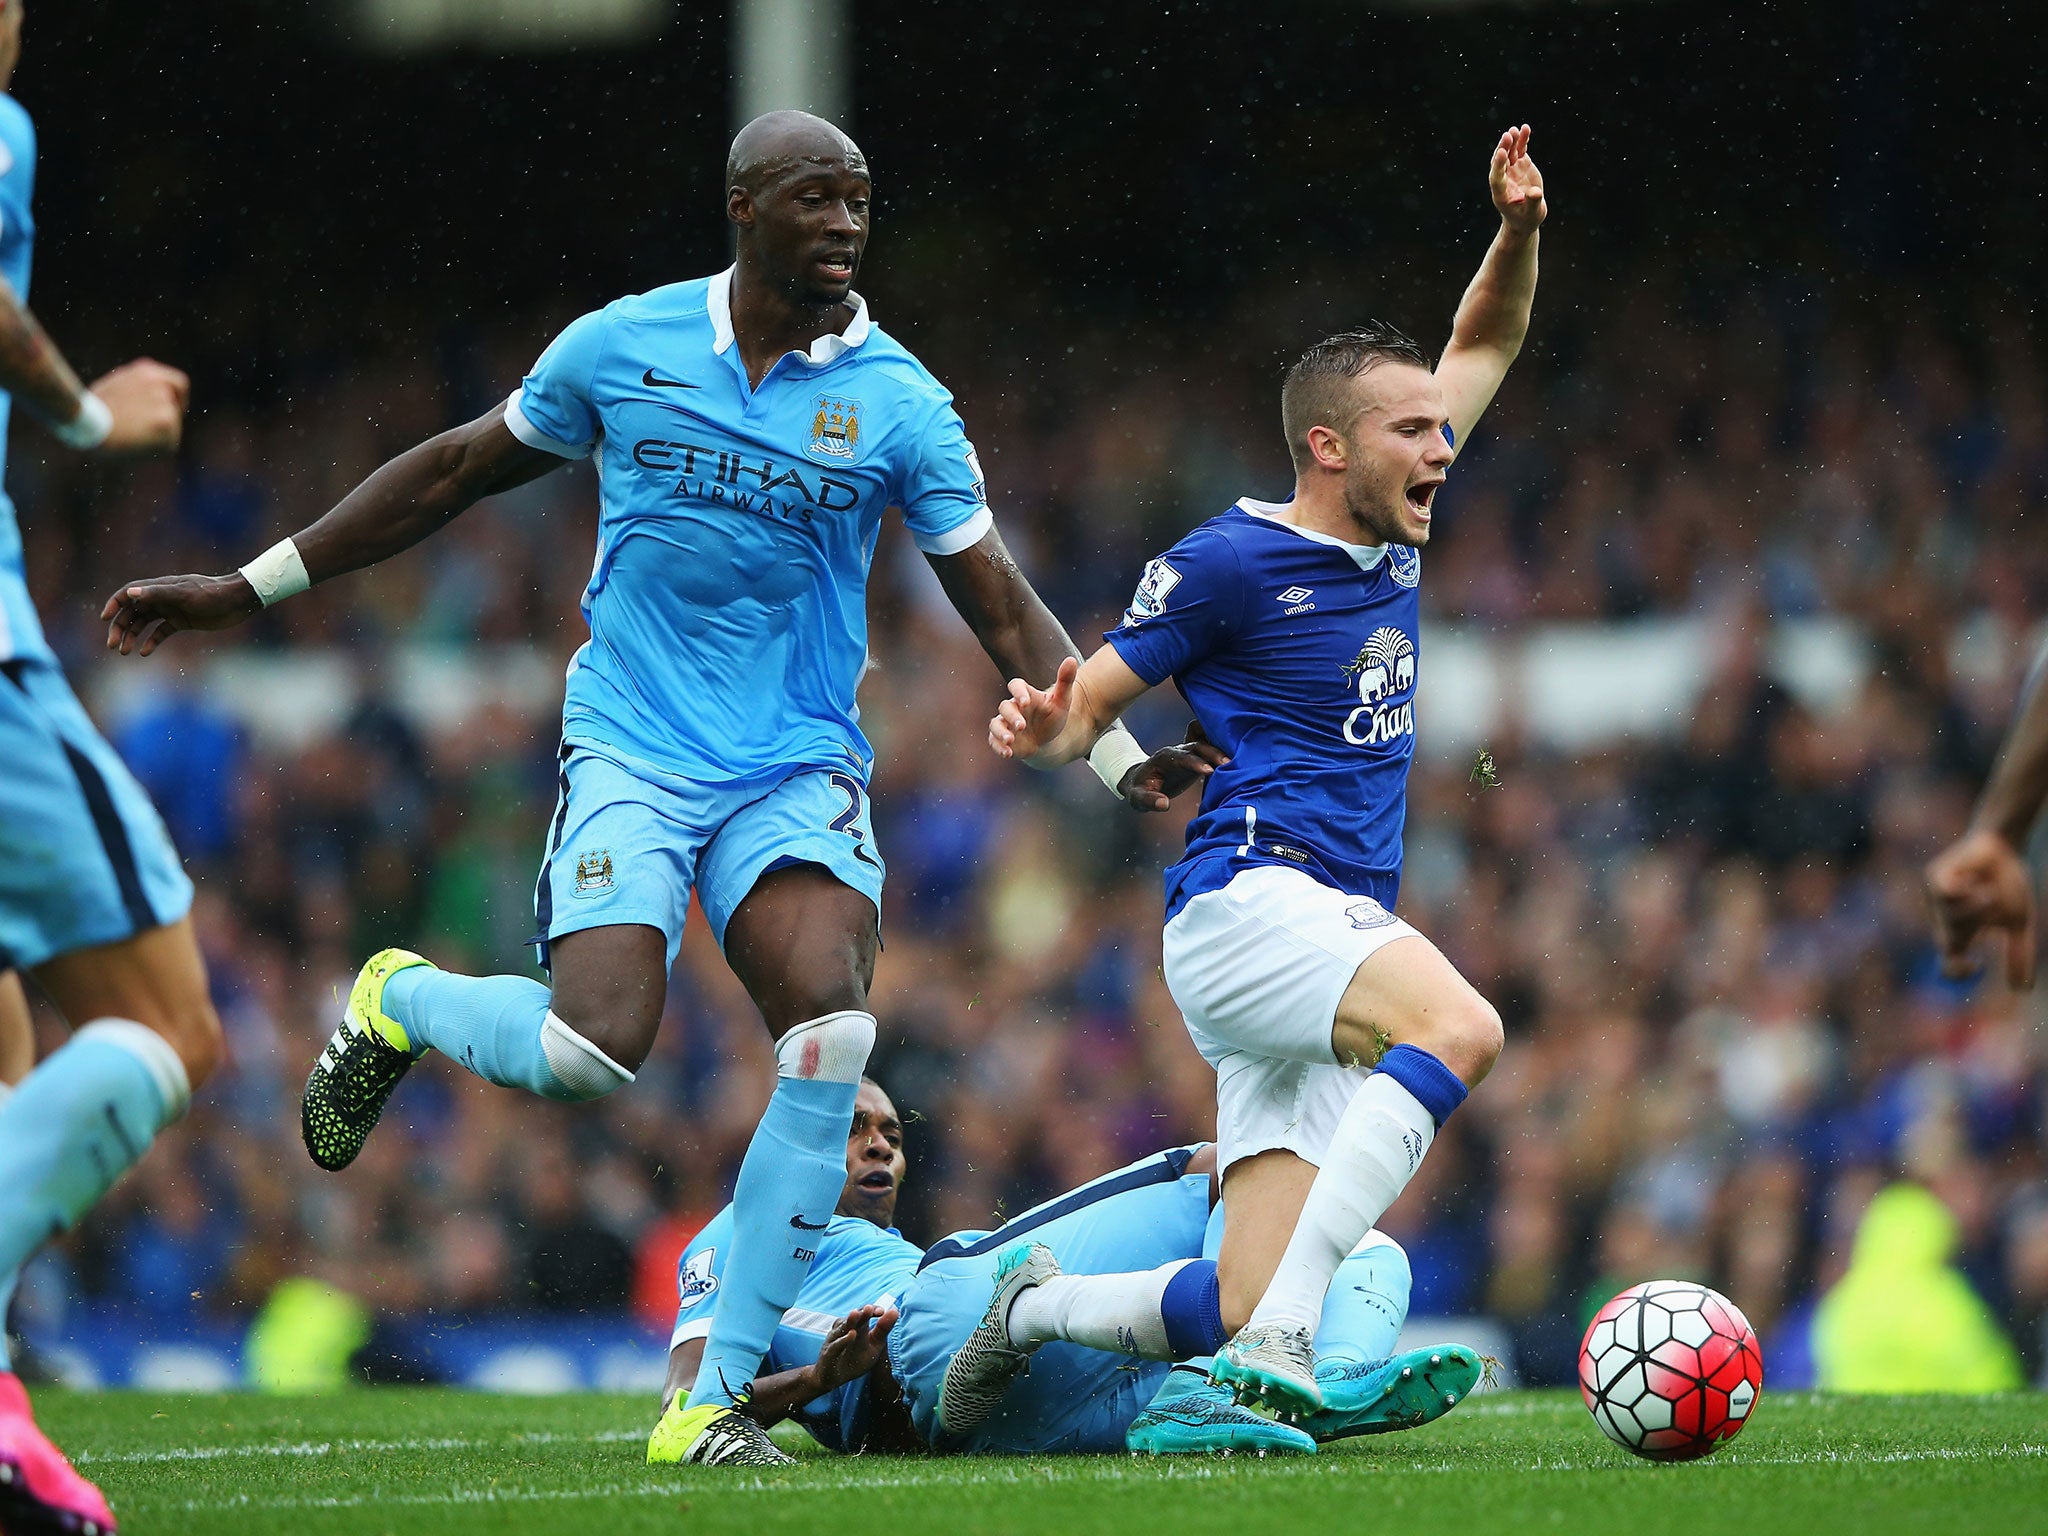 Cleverley in action for Everton earlier this season